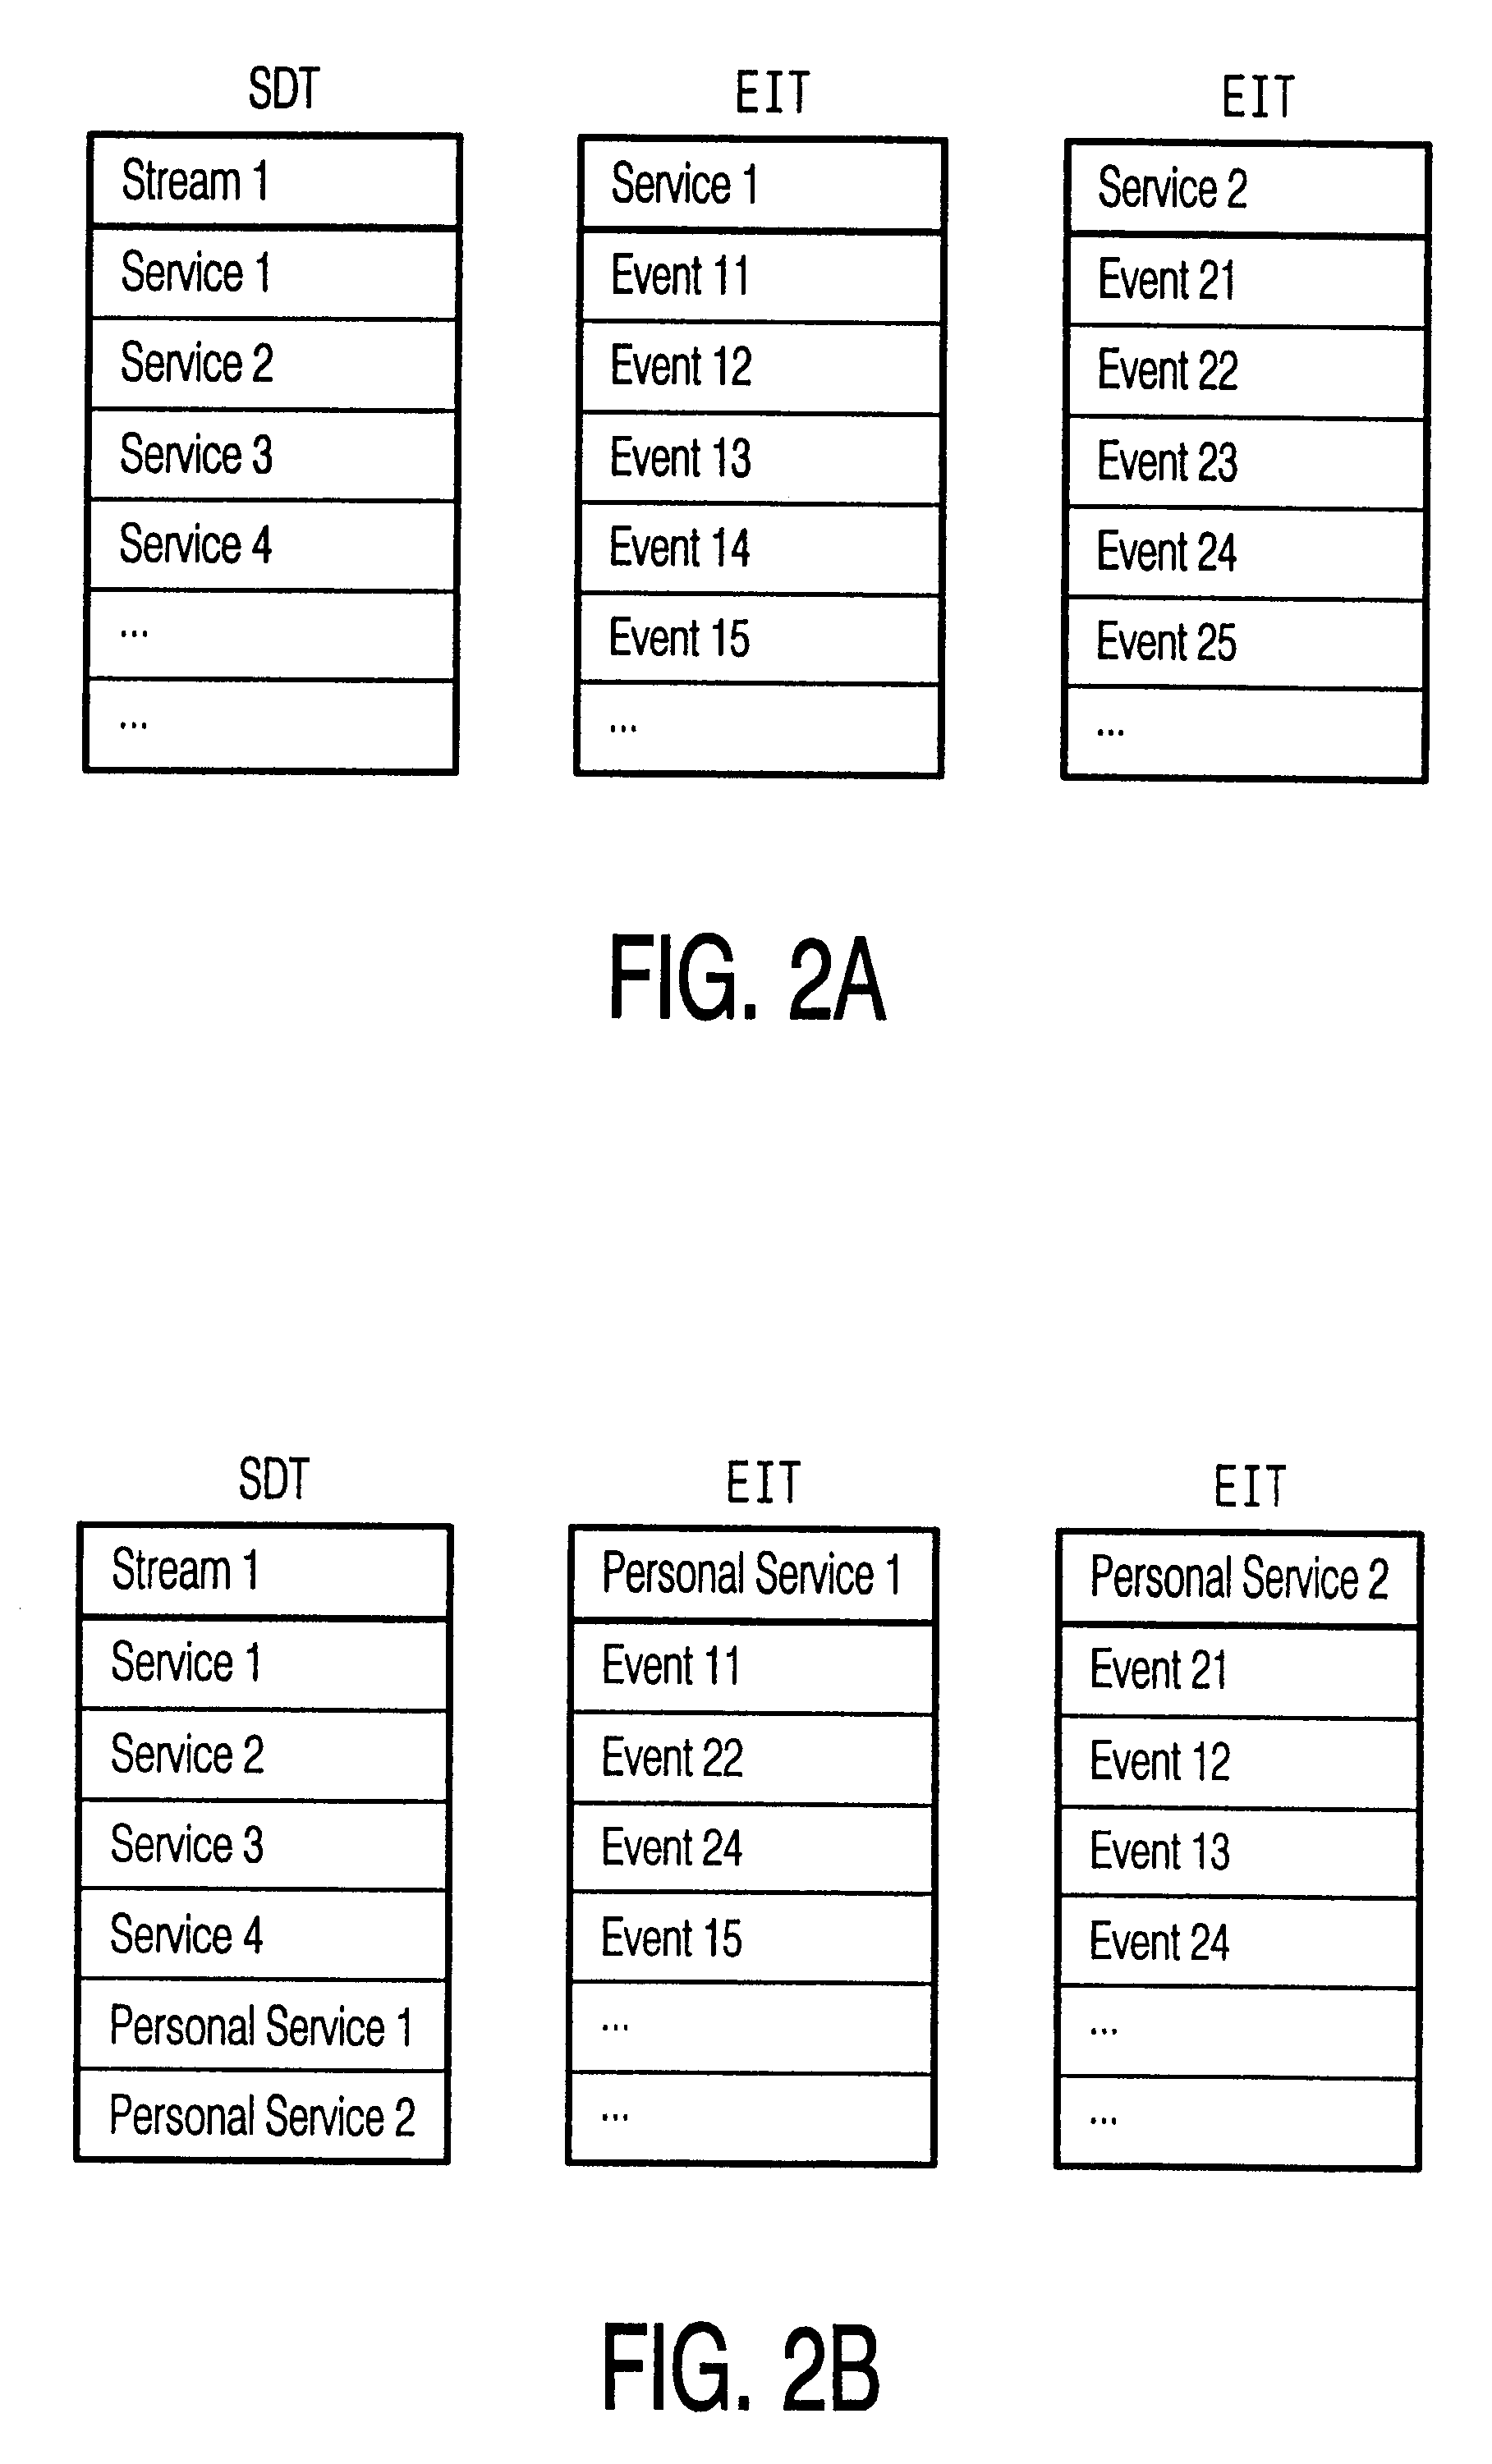 Apparatus and method for rescheduling program conflicts in a virtual channel scheduling gap